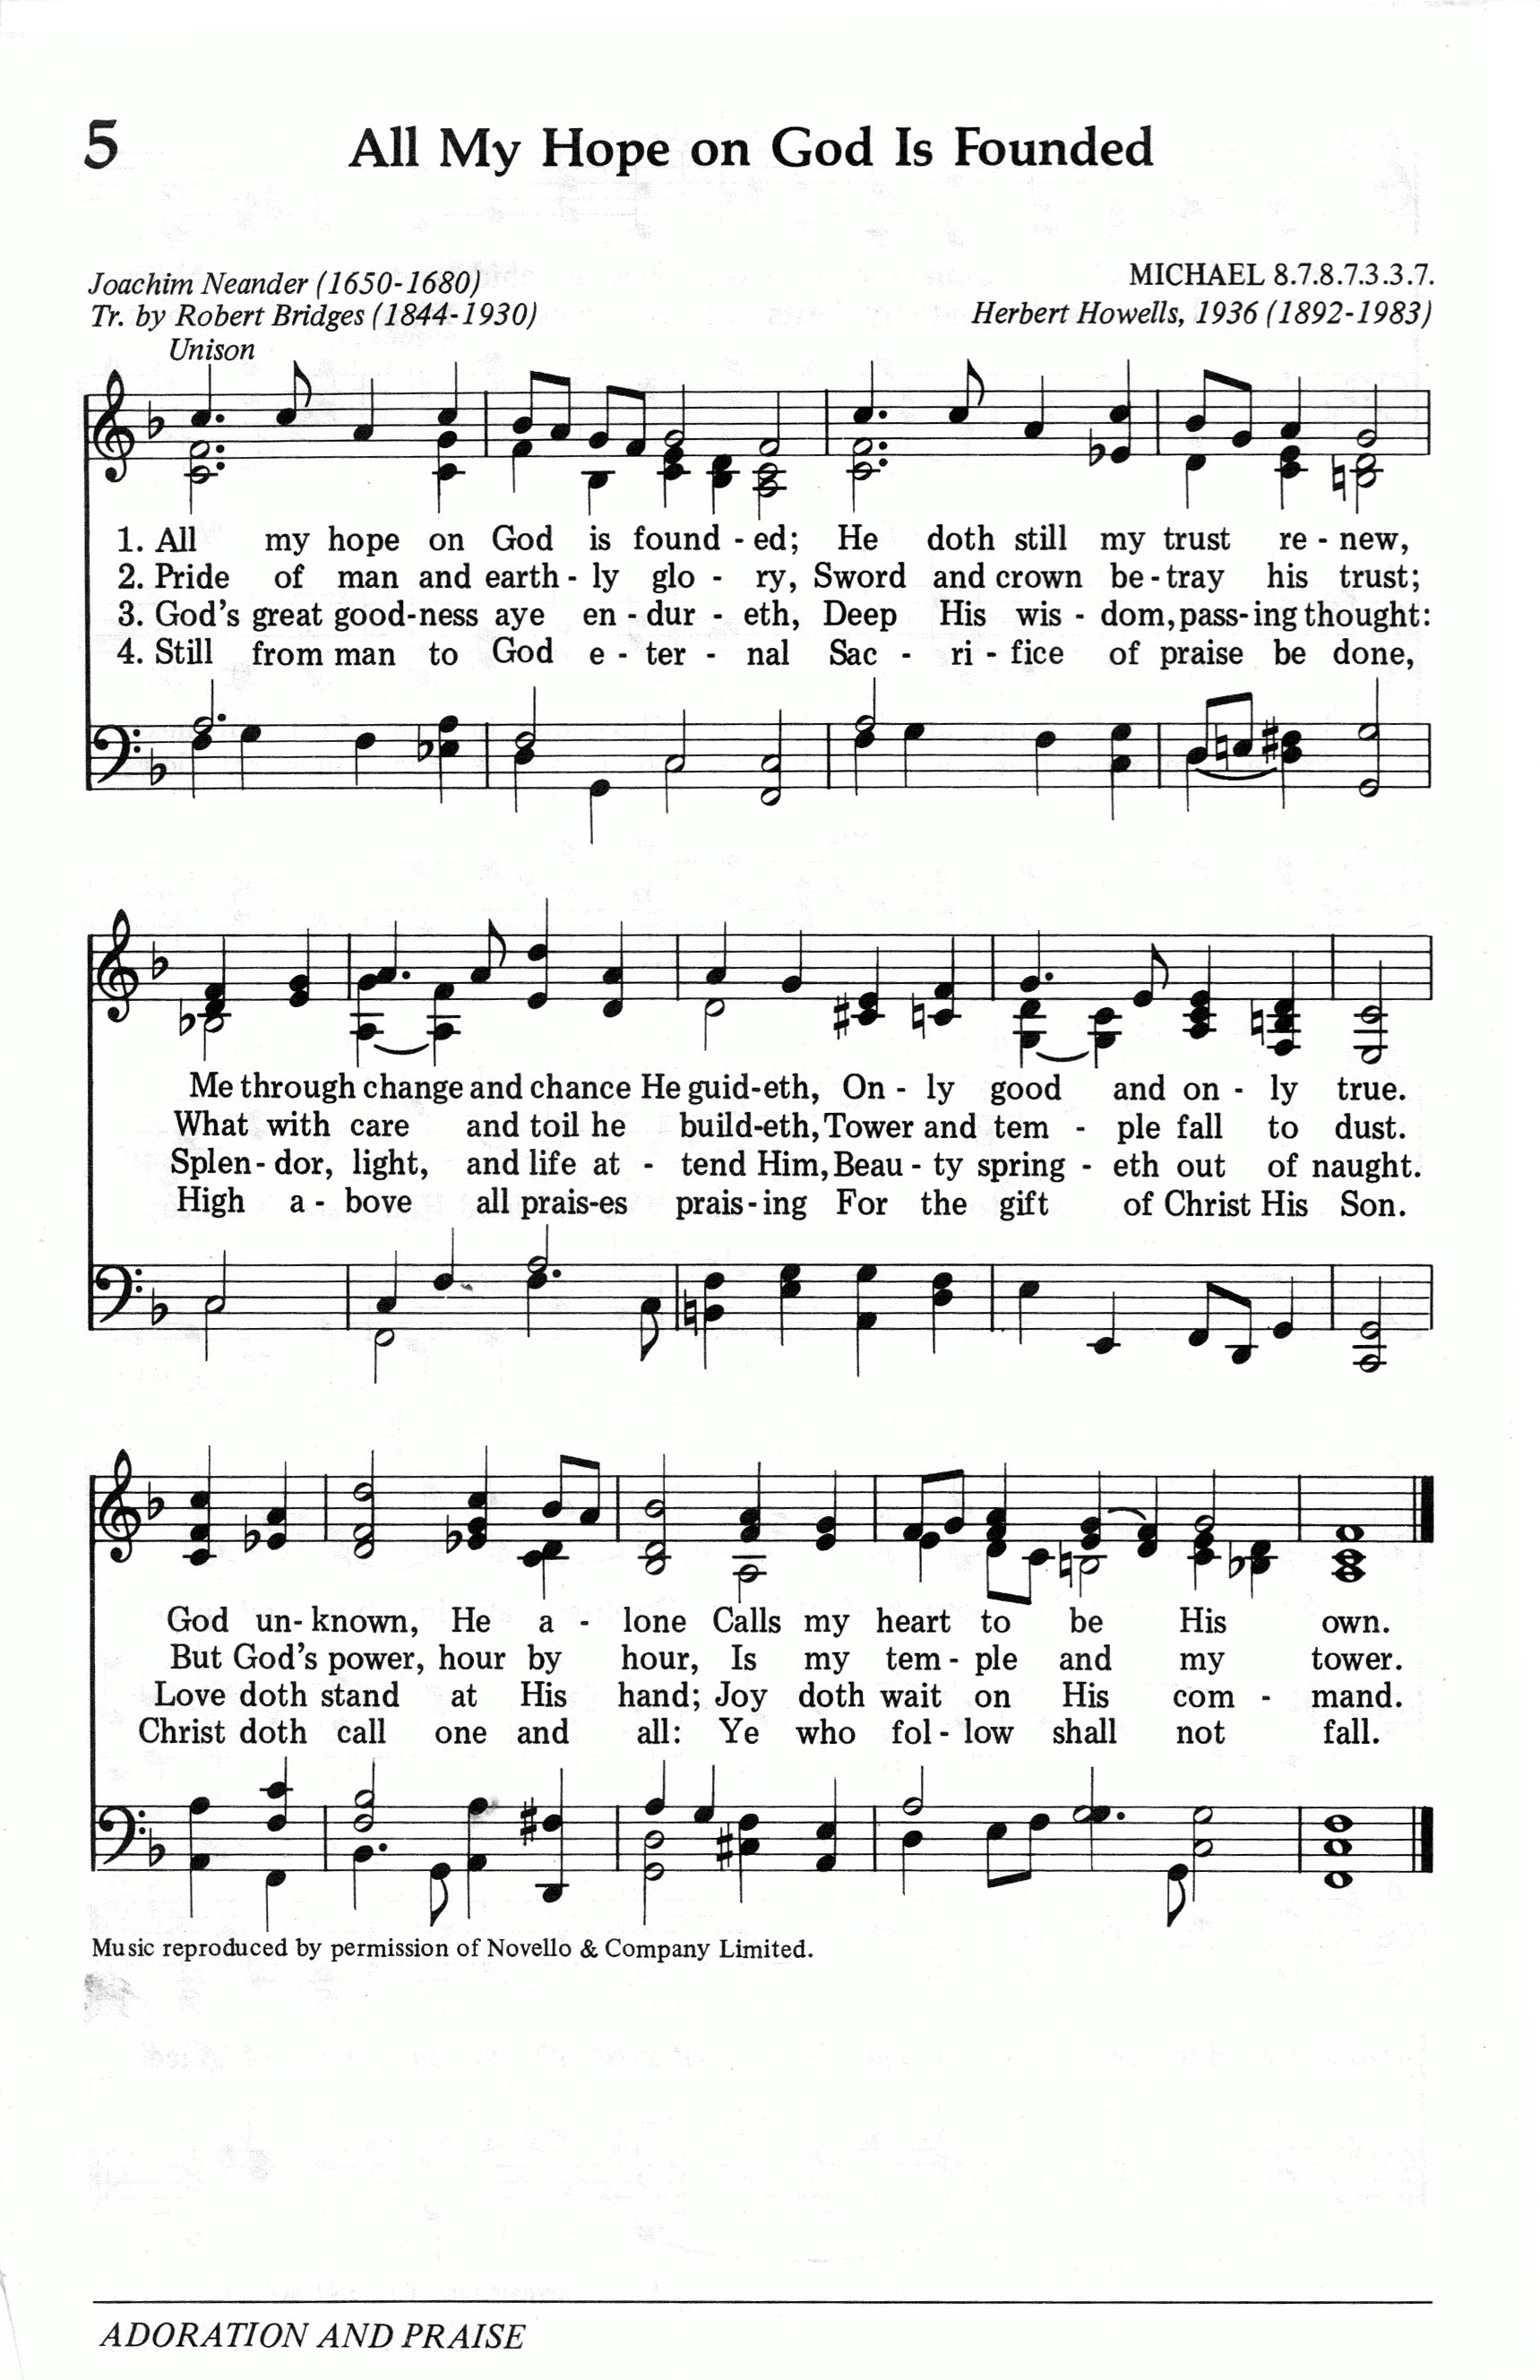 005.All My Hope on God Is Founded-695HYMN